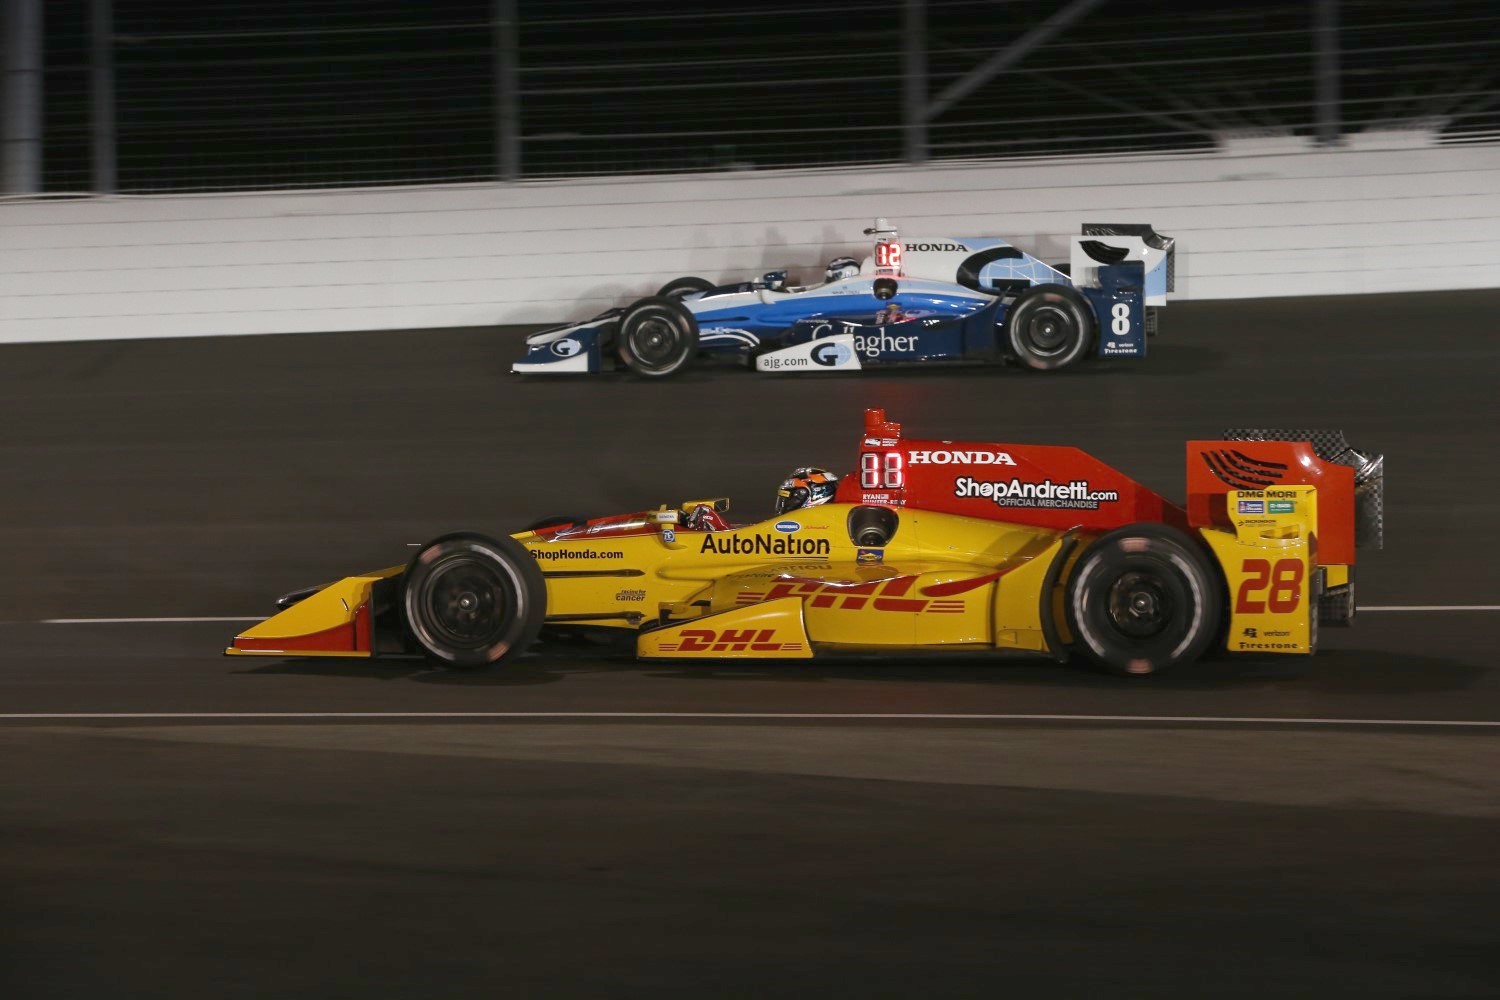 Will compliment the IndyCar weekend